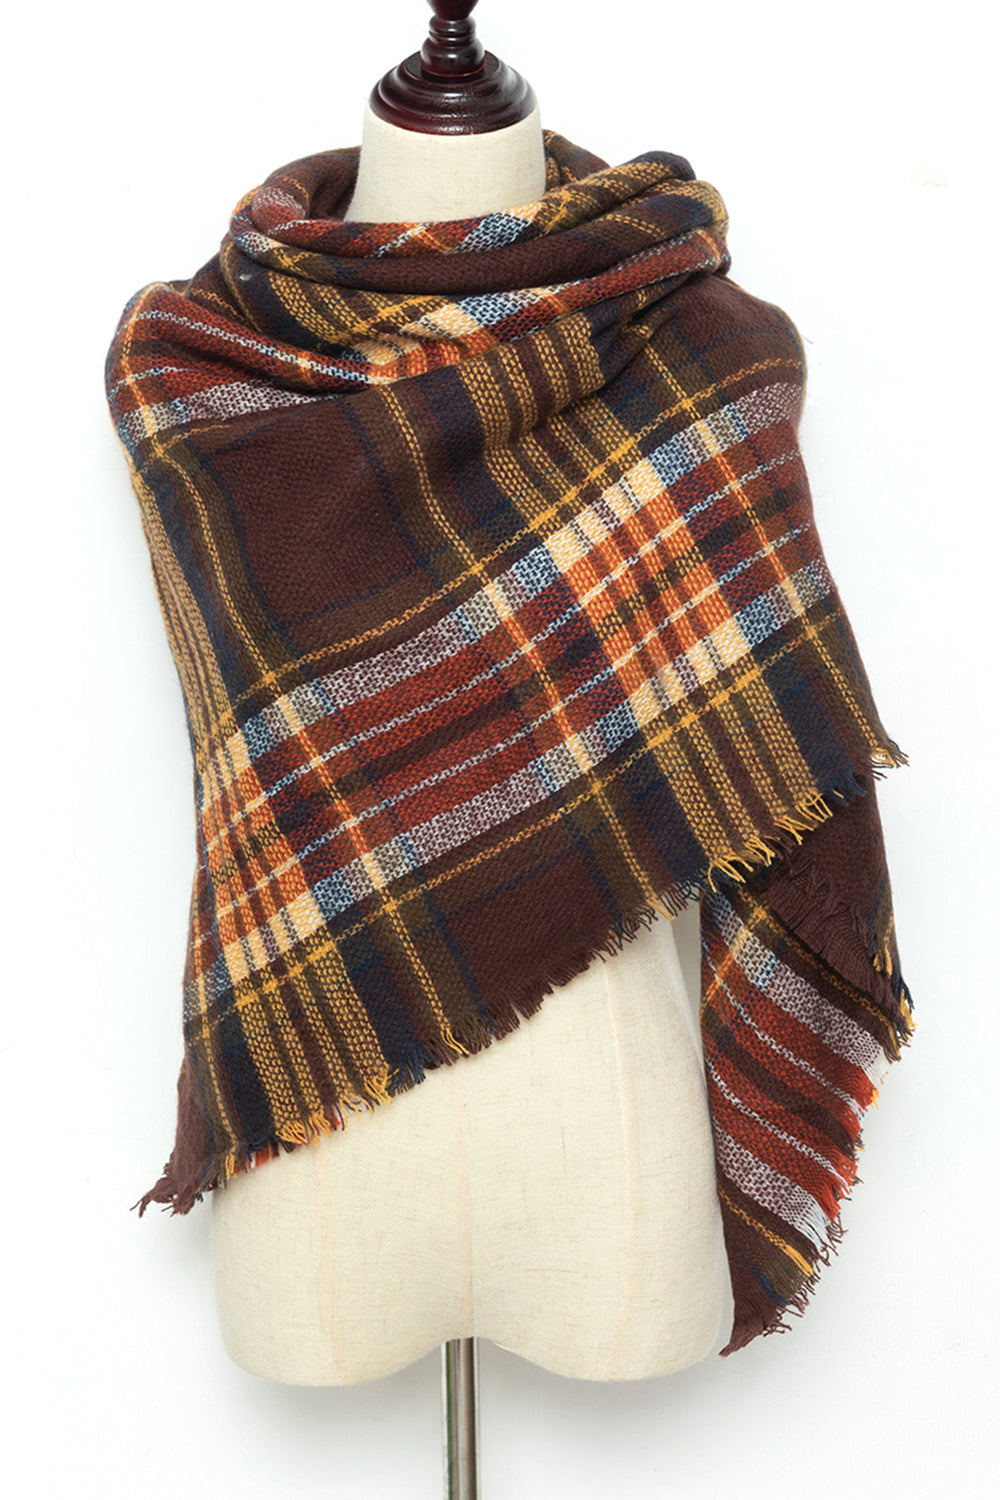 yellow and black plaid scarf